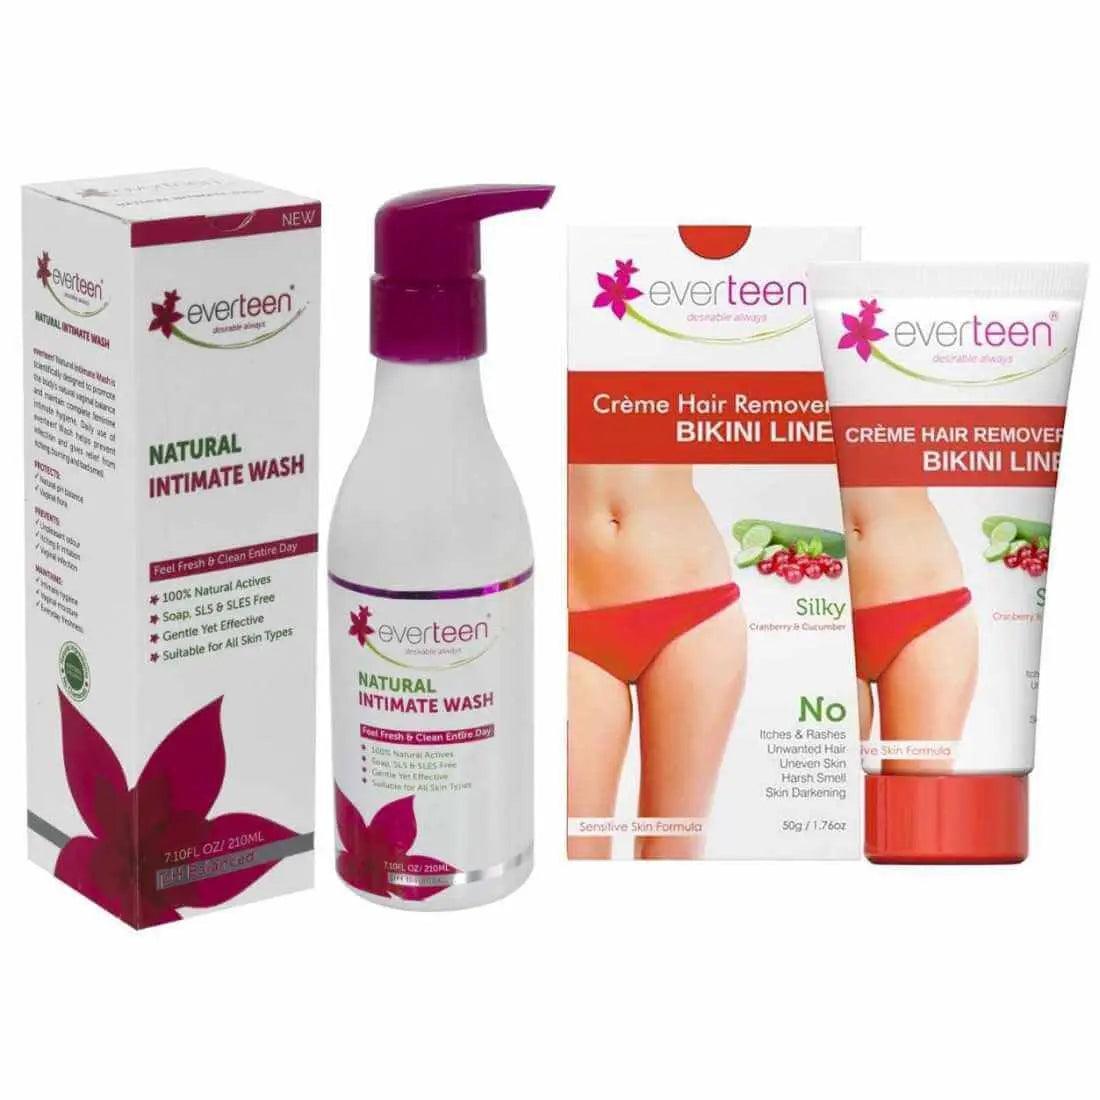 everteen Combo: Bikini Line Hair Removal Creme SILKY and Natural Intimate Wash for Women 9559682302694